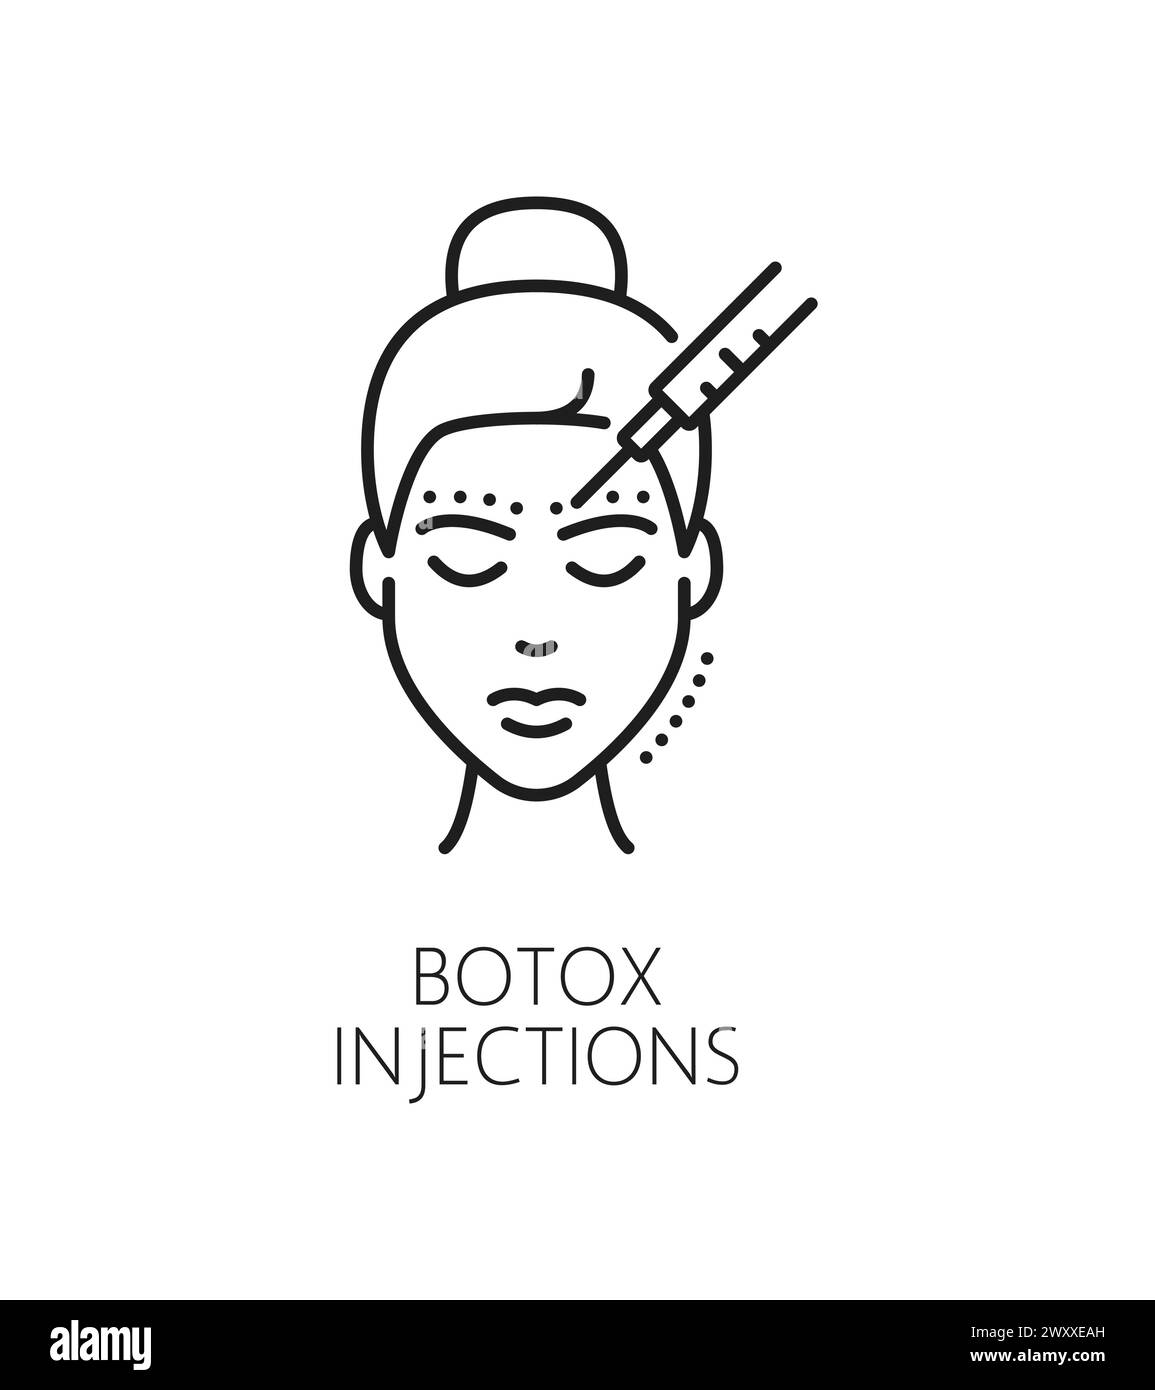 Botox injection cosmetology icon. Isolated vector linear sign of popular cosmetic procedure involves injecting a purified toxin for achieving a smoother, youthful appearance with minimal downtime Stock Vector